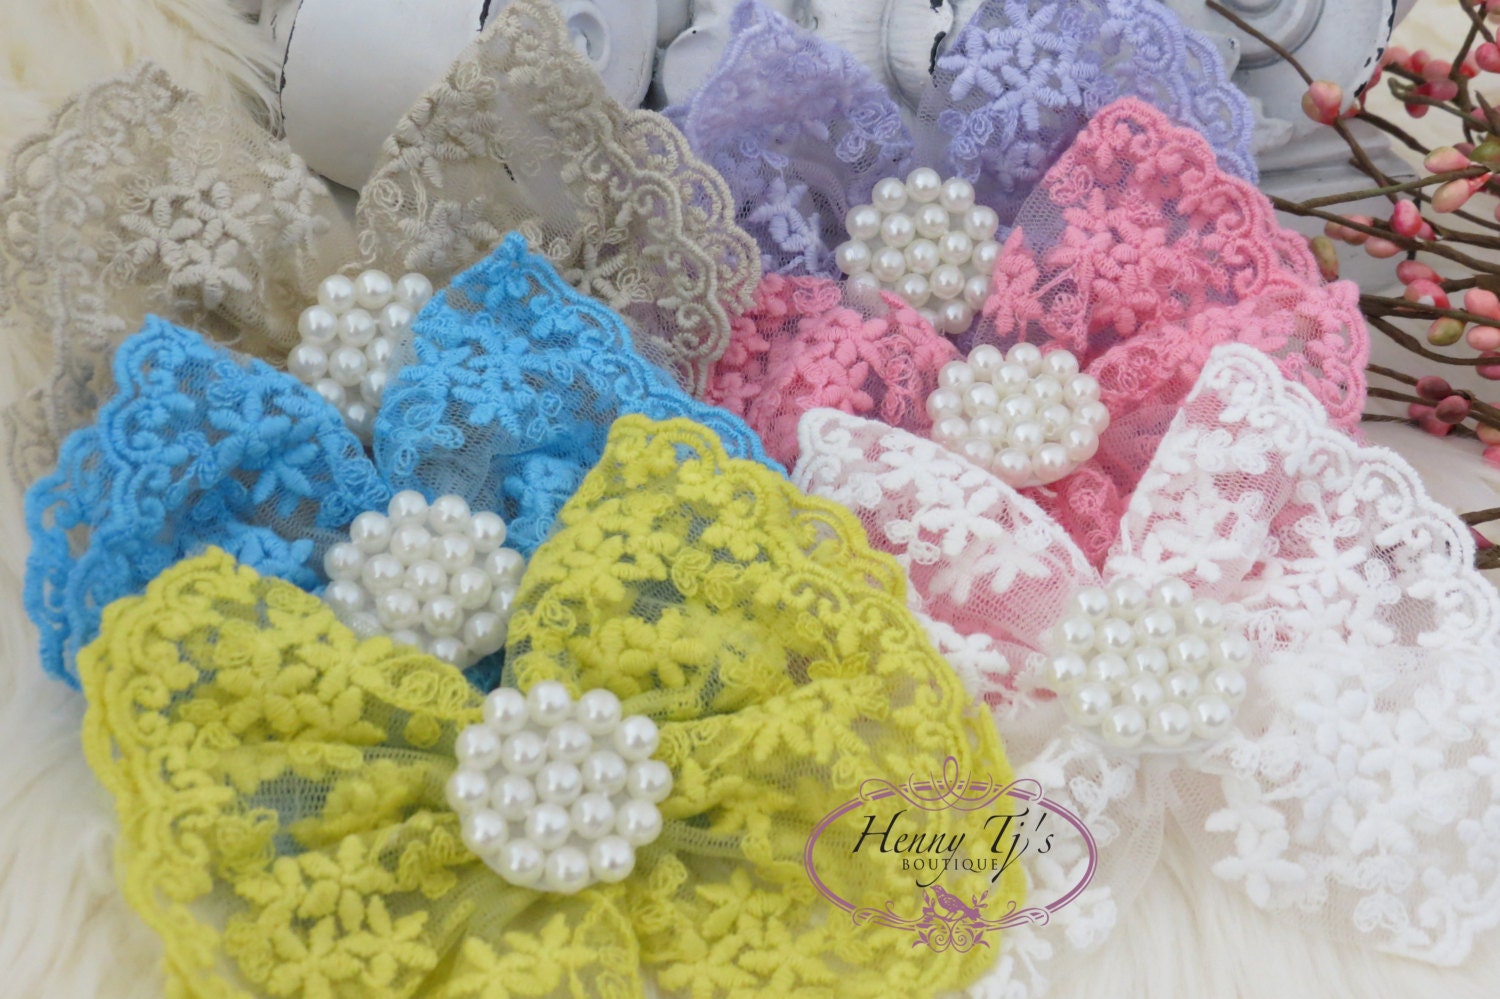 NEW: Set of 6 You Pick Colors - Quinlan Collection Beautiful Lace and Pearls Hair Bow Applique.Hair accessories.Bridal garter. Bridal Sash